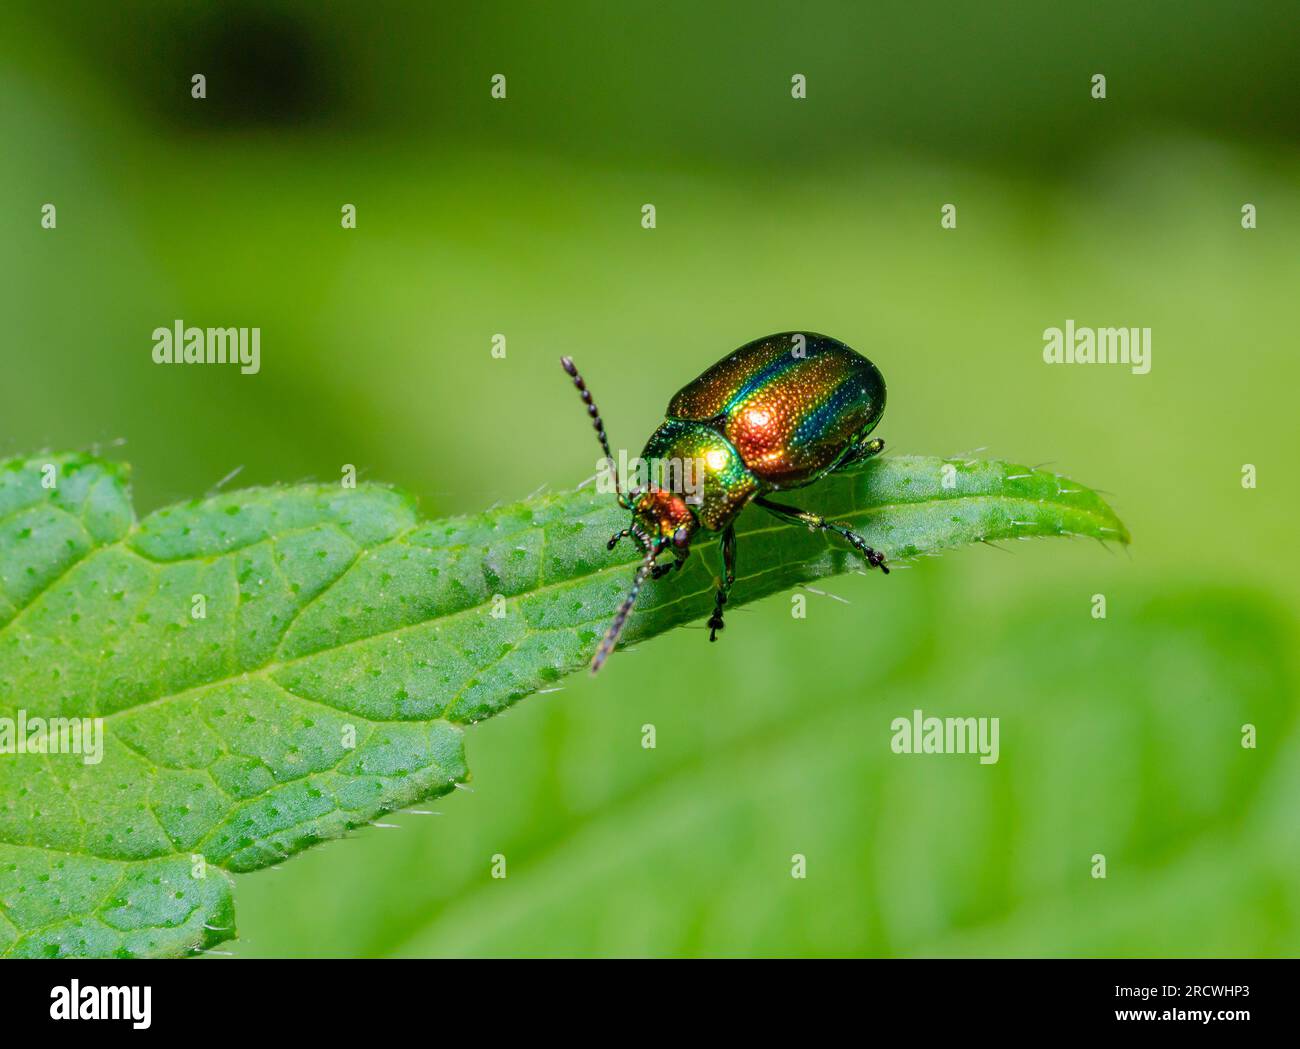 Dead-nettle leaf beetle at the edge of a leaf in green ambiance Stock Photo